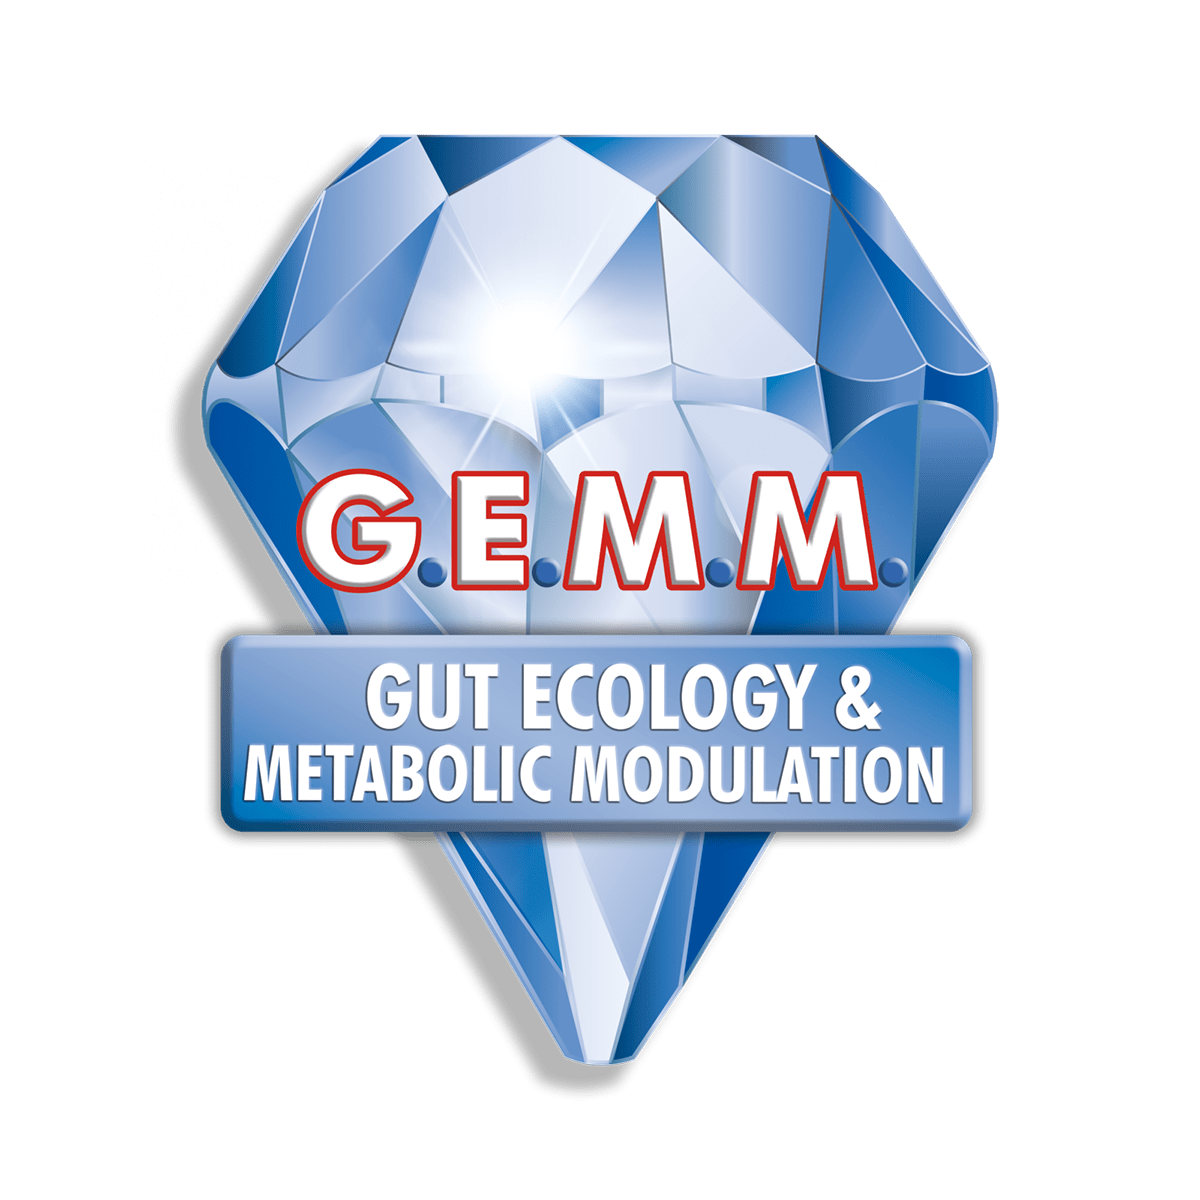 G.E.M.M. Gut Ecology and Metabolic Modulation Course